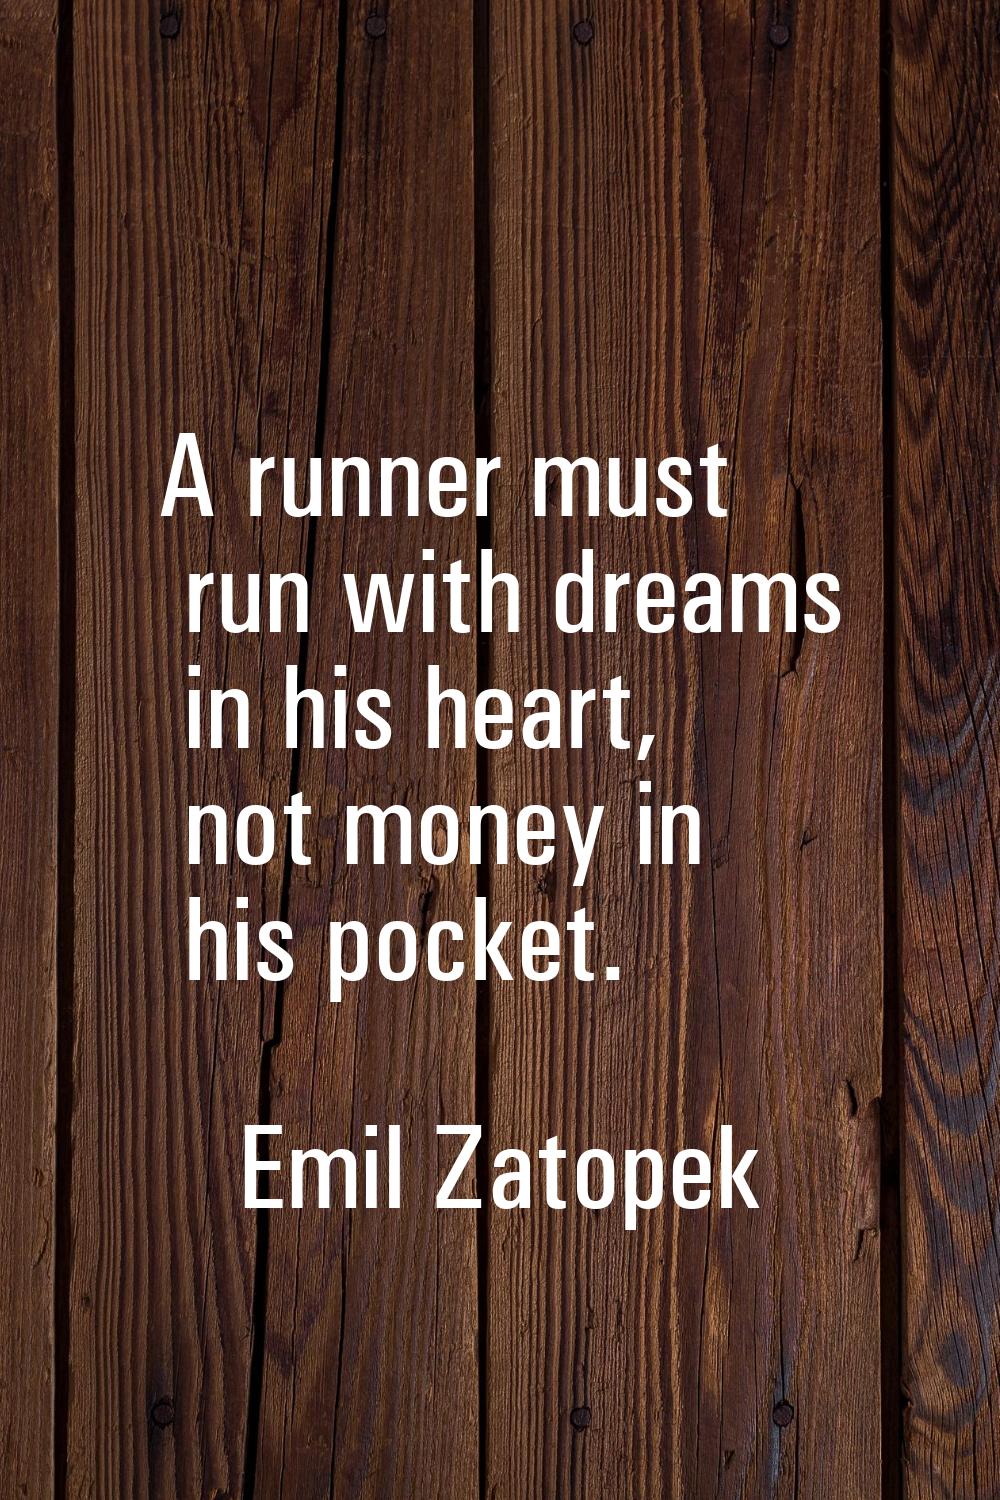 A runner must run with dreams in his heart, not money in his pocket.